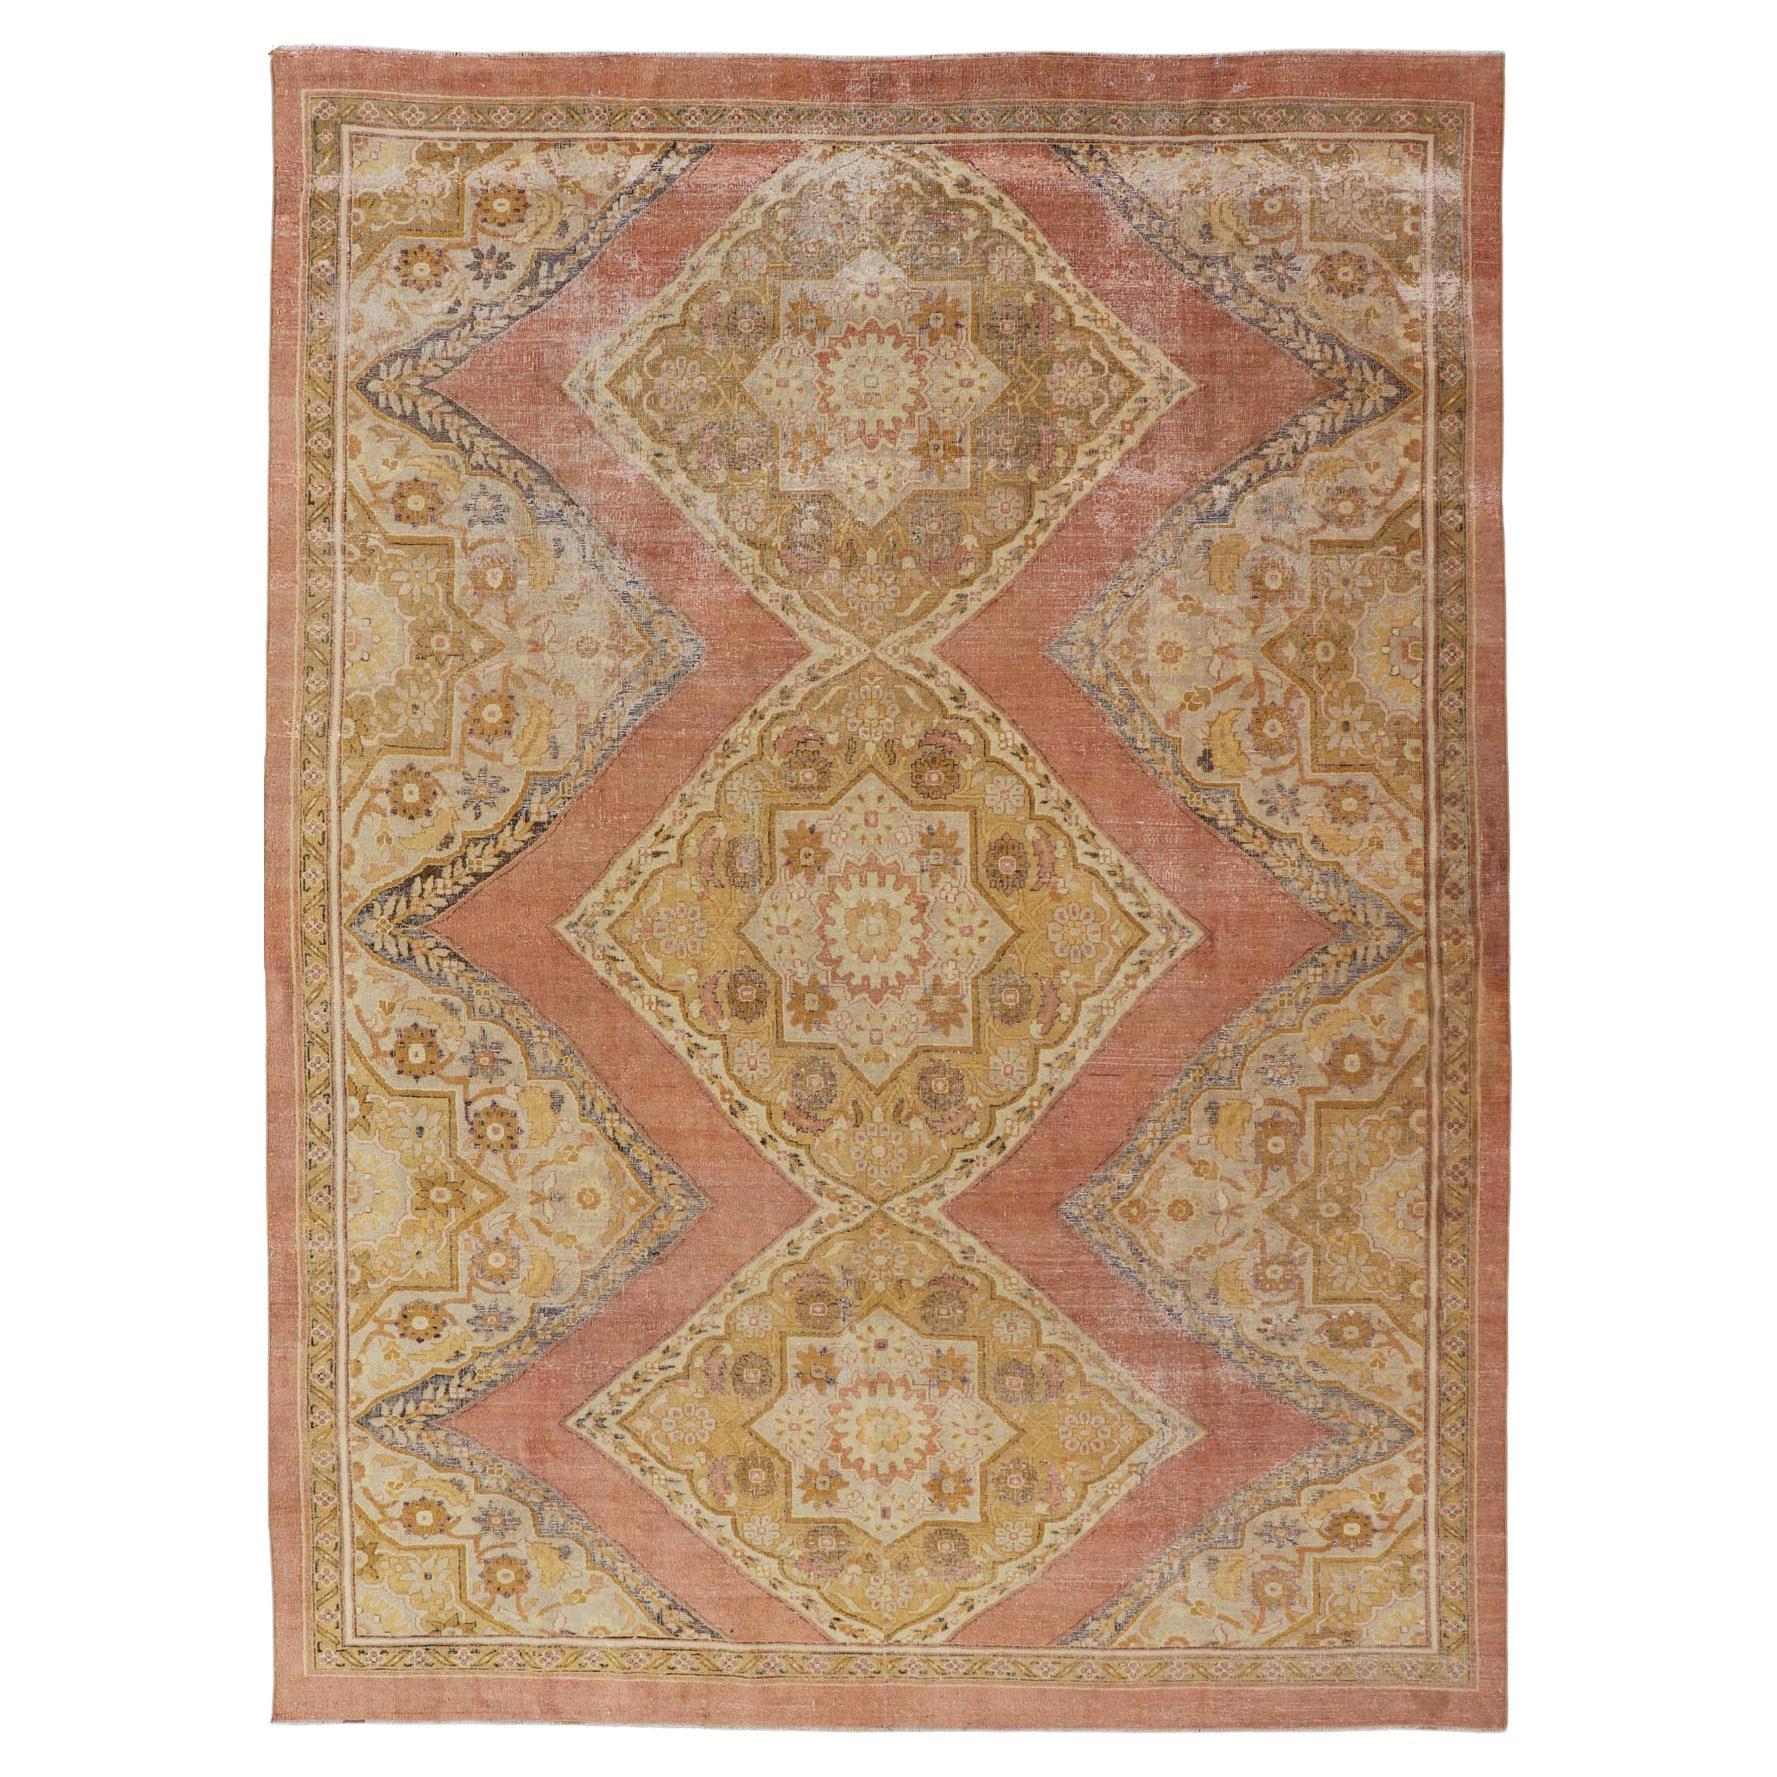 Antique Indian Agra Rug in Acidic Yellow Green, Pink and Ivory